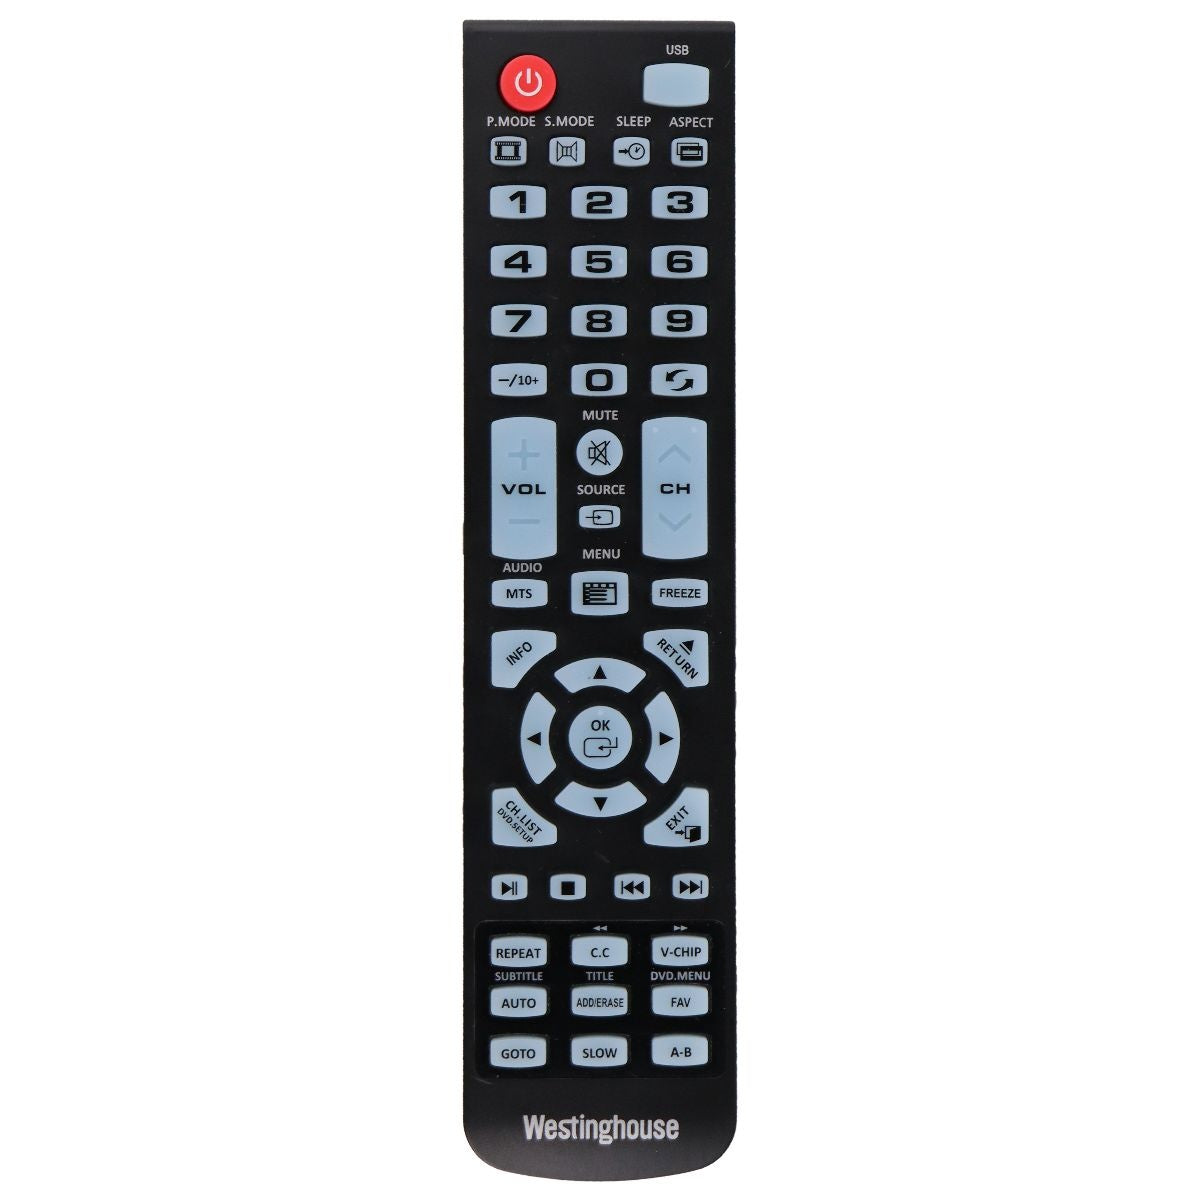 Westinghouse Remote Control (TY-49B) for Select Westinghouse TVs - Black TV, Video & Audio Accessories - Remote Controls Westinghouse    - Simple Cell Bulk Wholesale Pricing - USA Seller